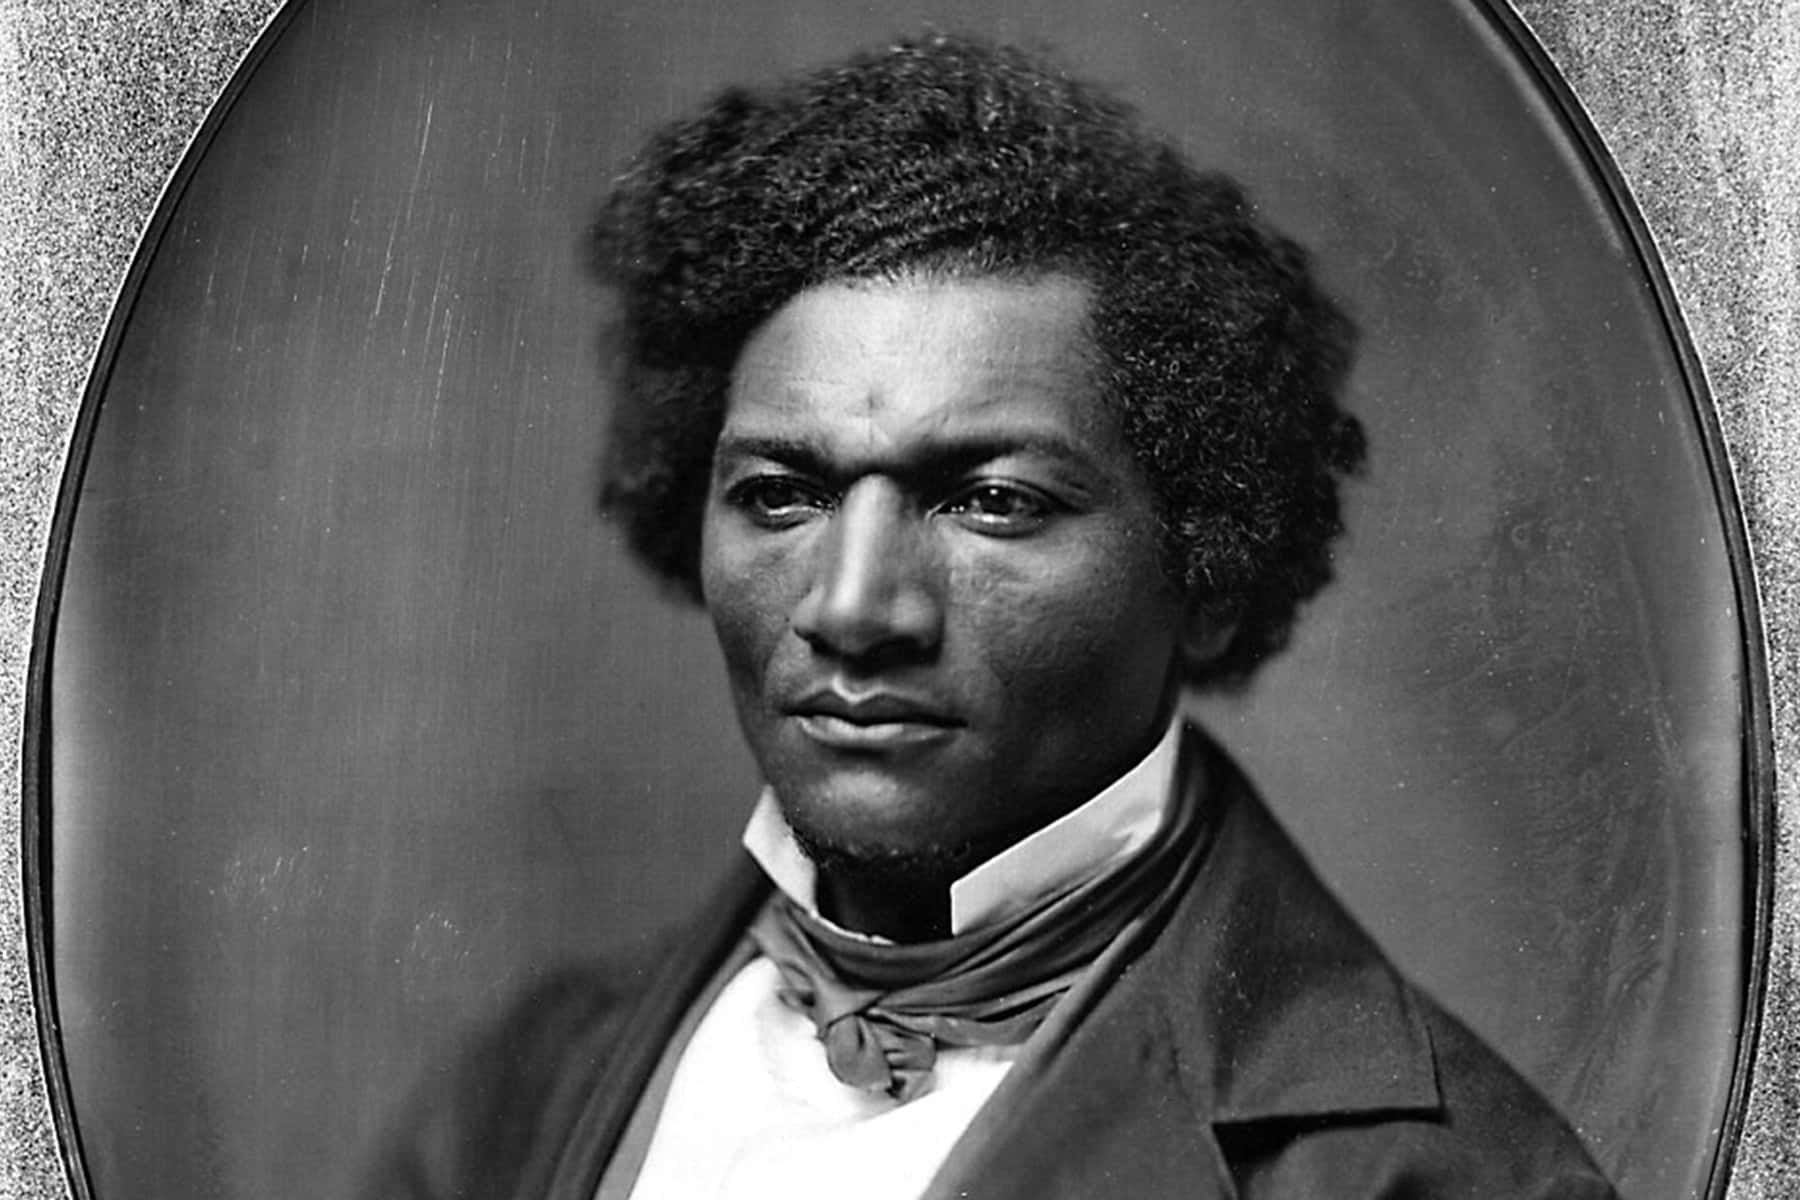 Prophet of Freedom: Biography details the life of abolitionist Frederick Douglass ...